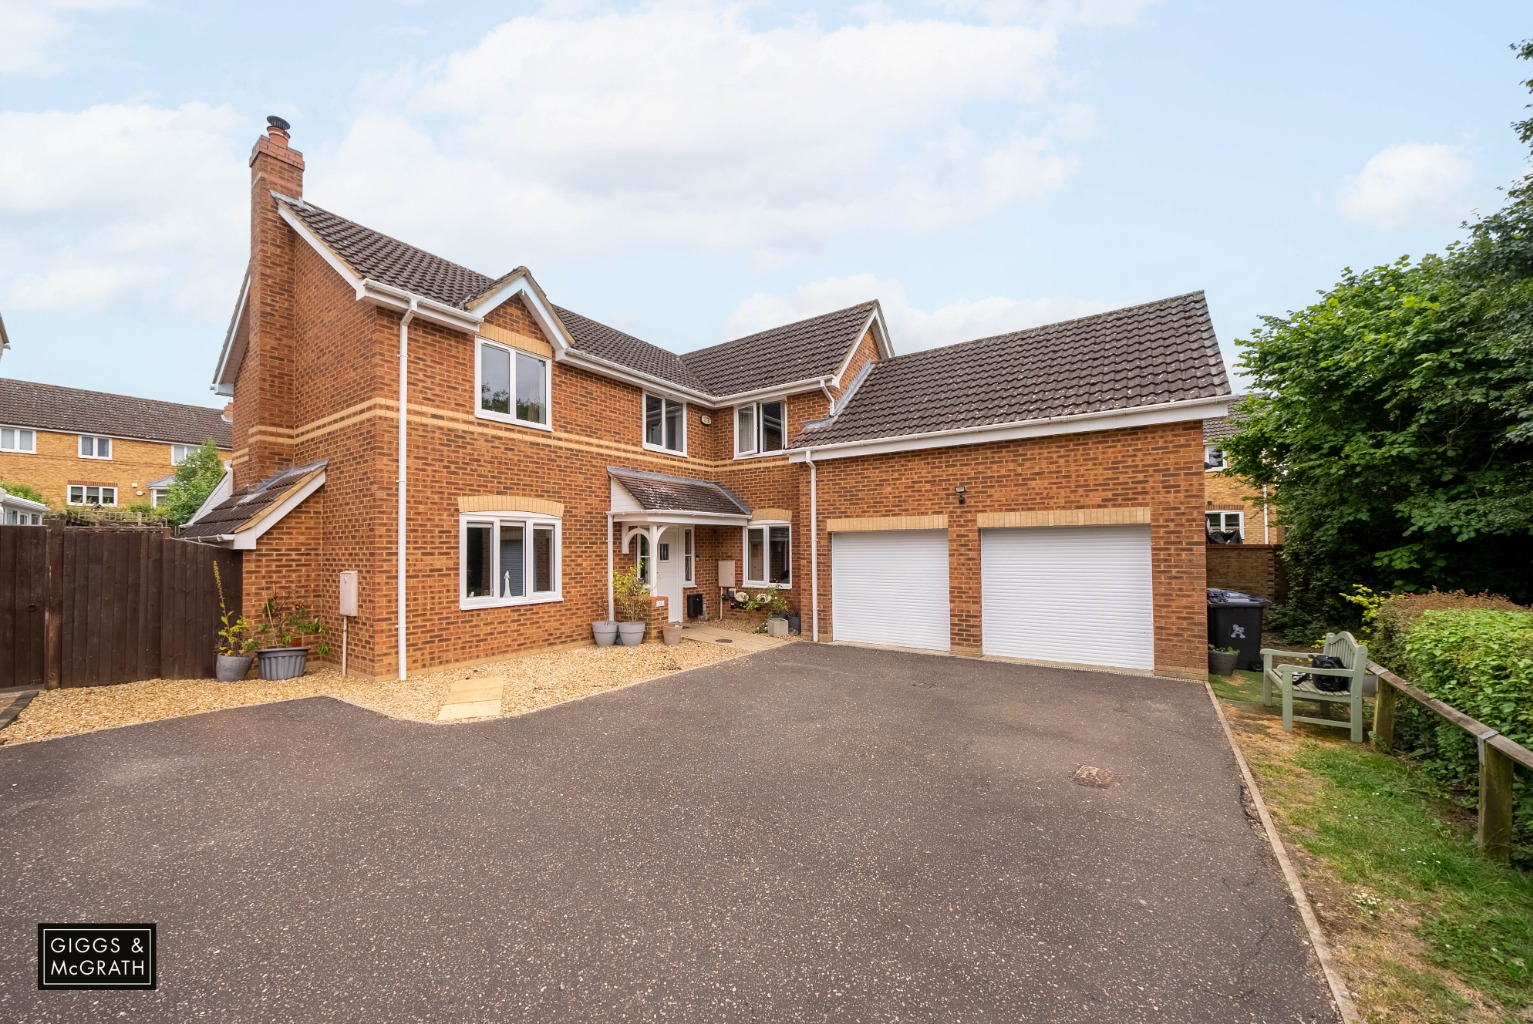 5 bed detached house for sale in Hut Field Lane, Cambridge - Property Image 1